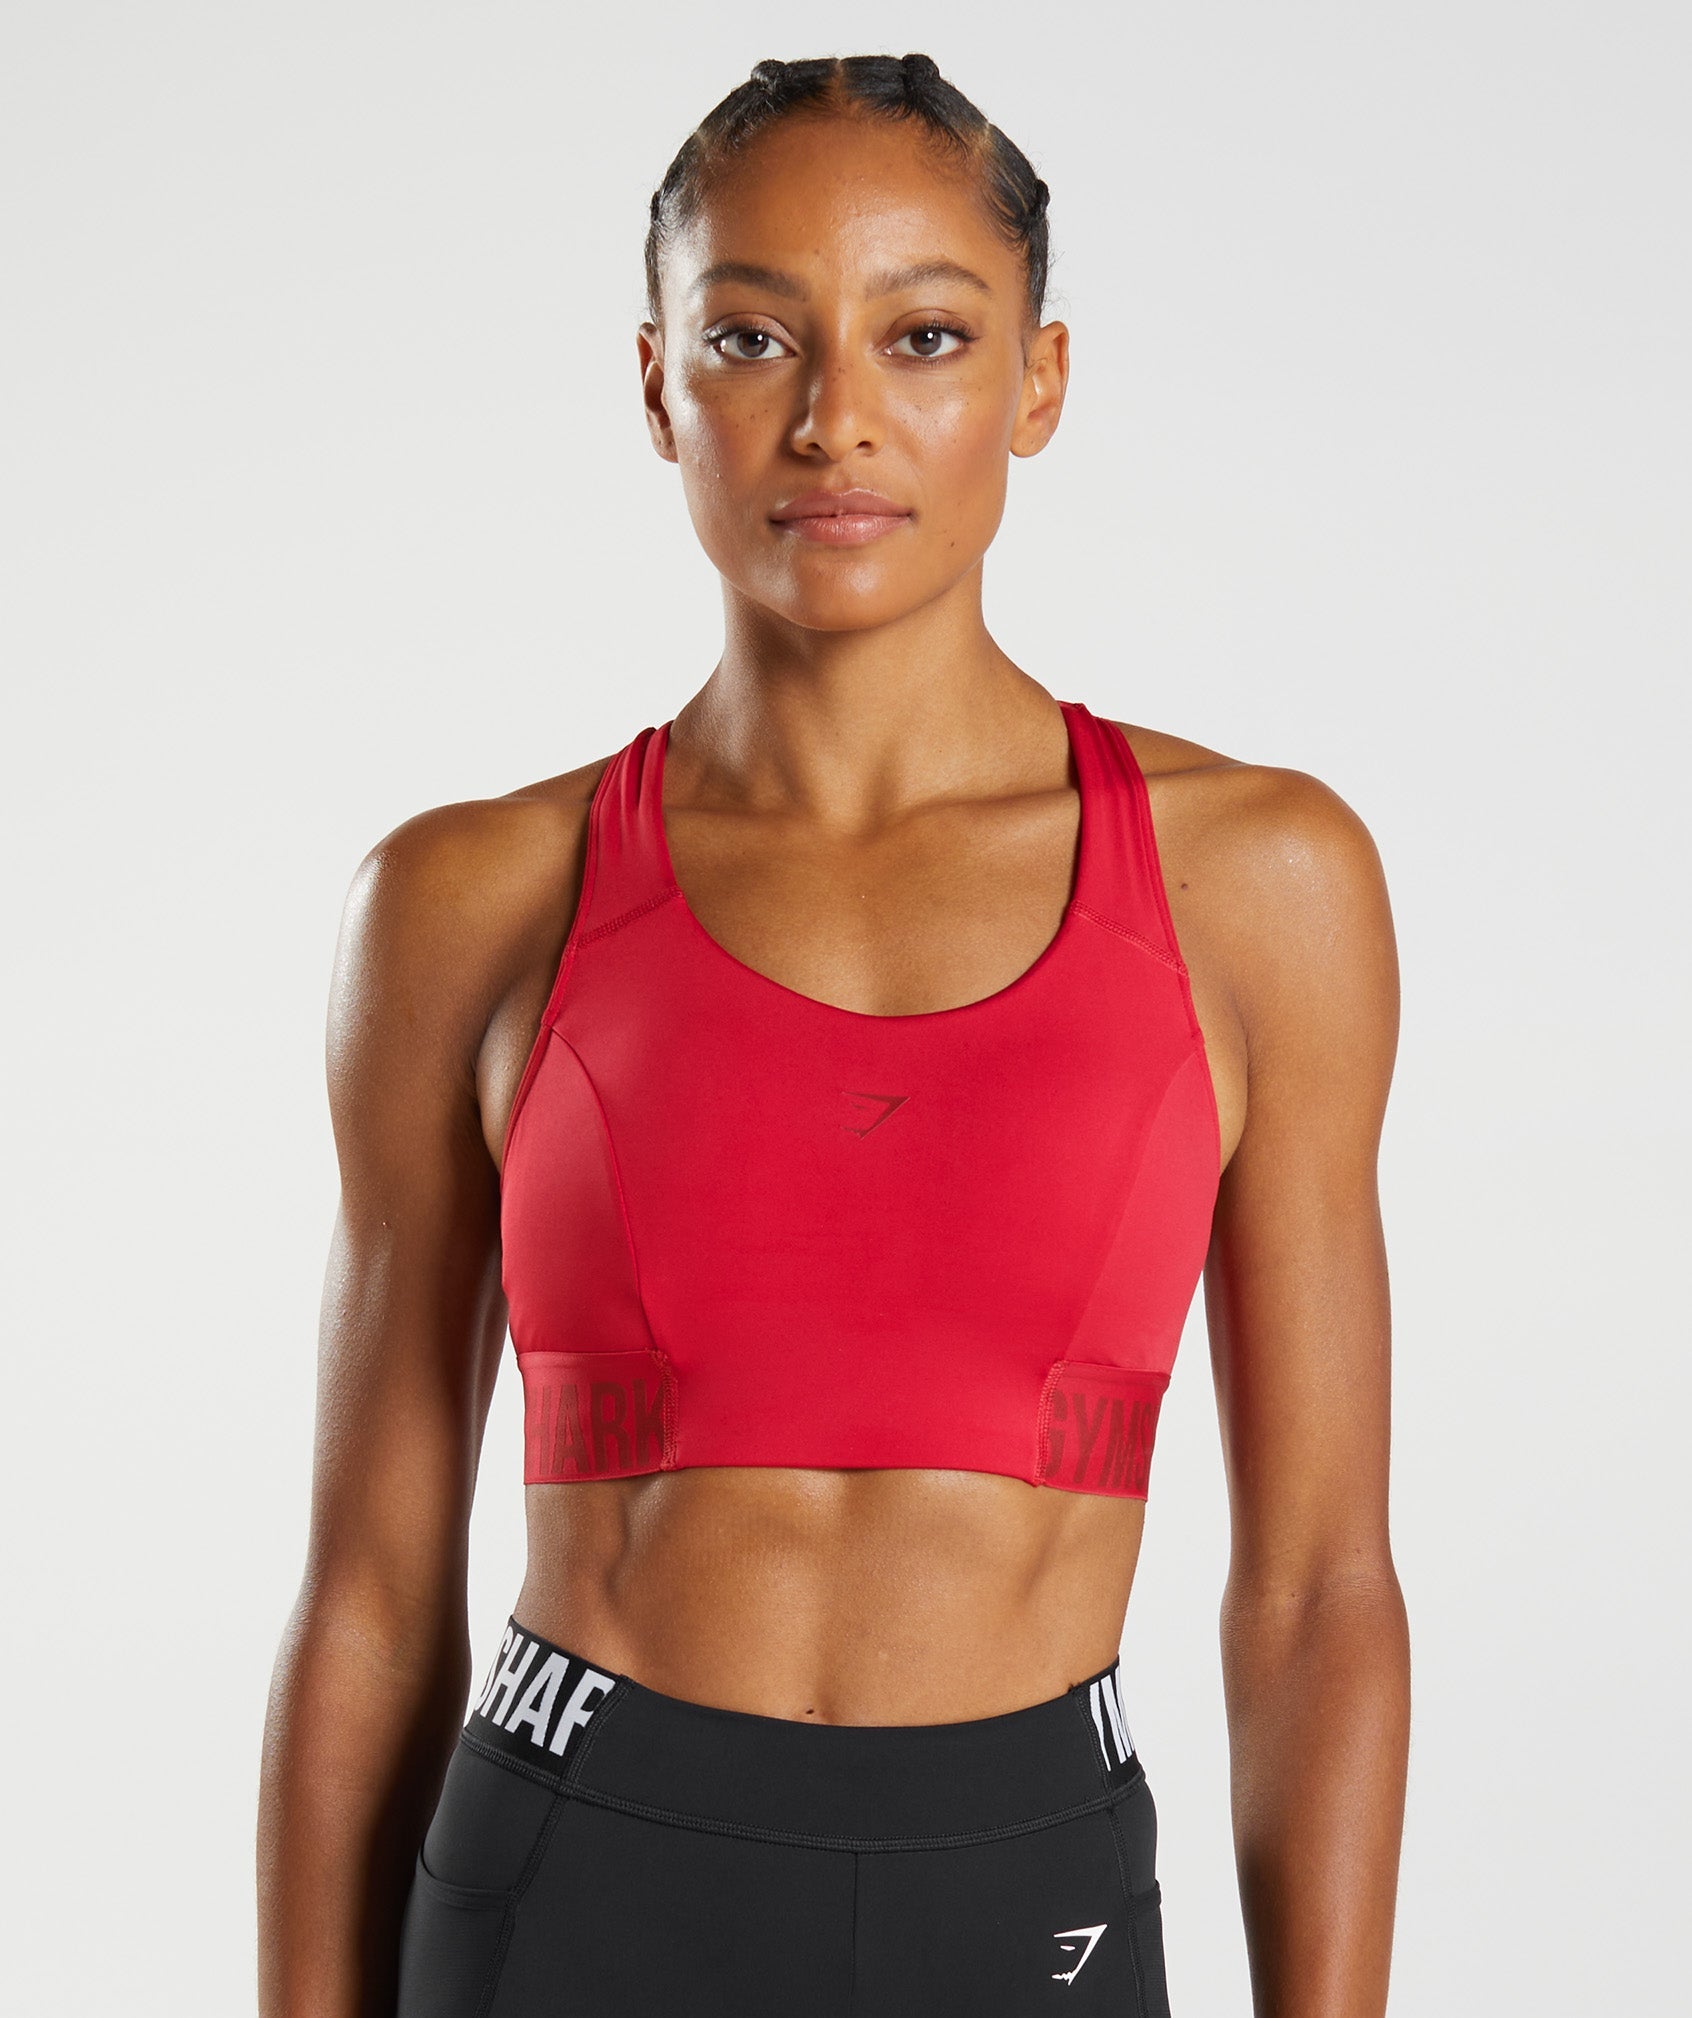 Champion Athletic Workout Women's Sports Bra, Red, XS price in UAE